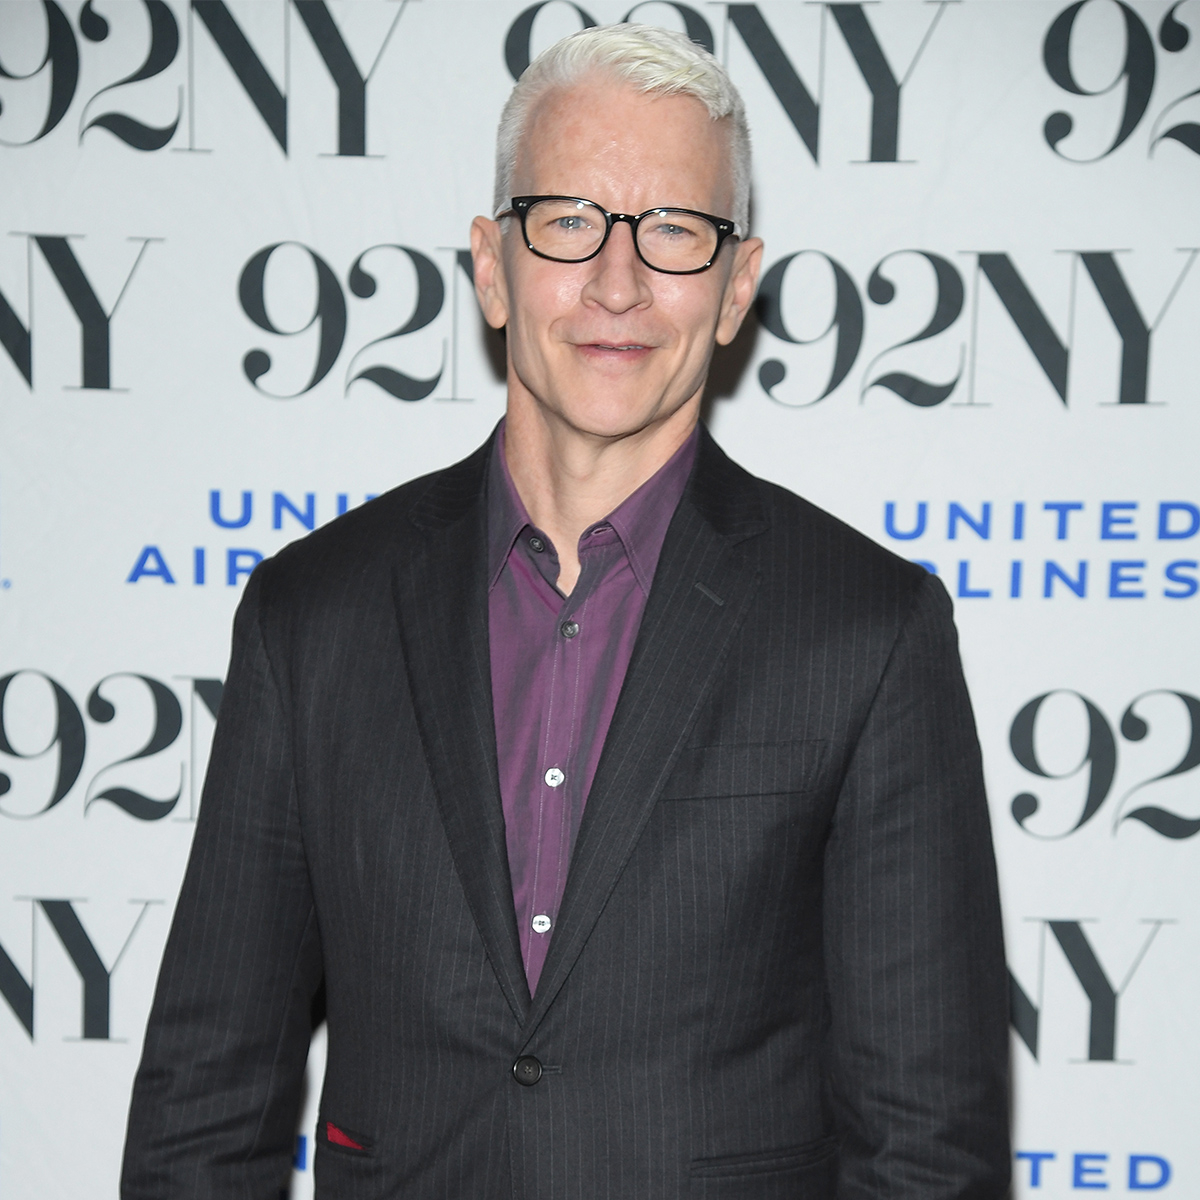 Anderson Cooper Details His Mom’s “Crazy” Idea to Be His Surrogate